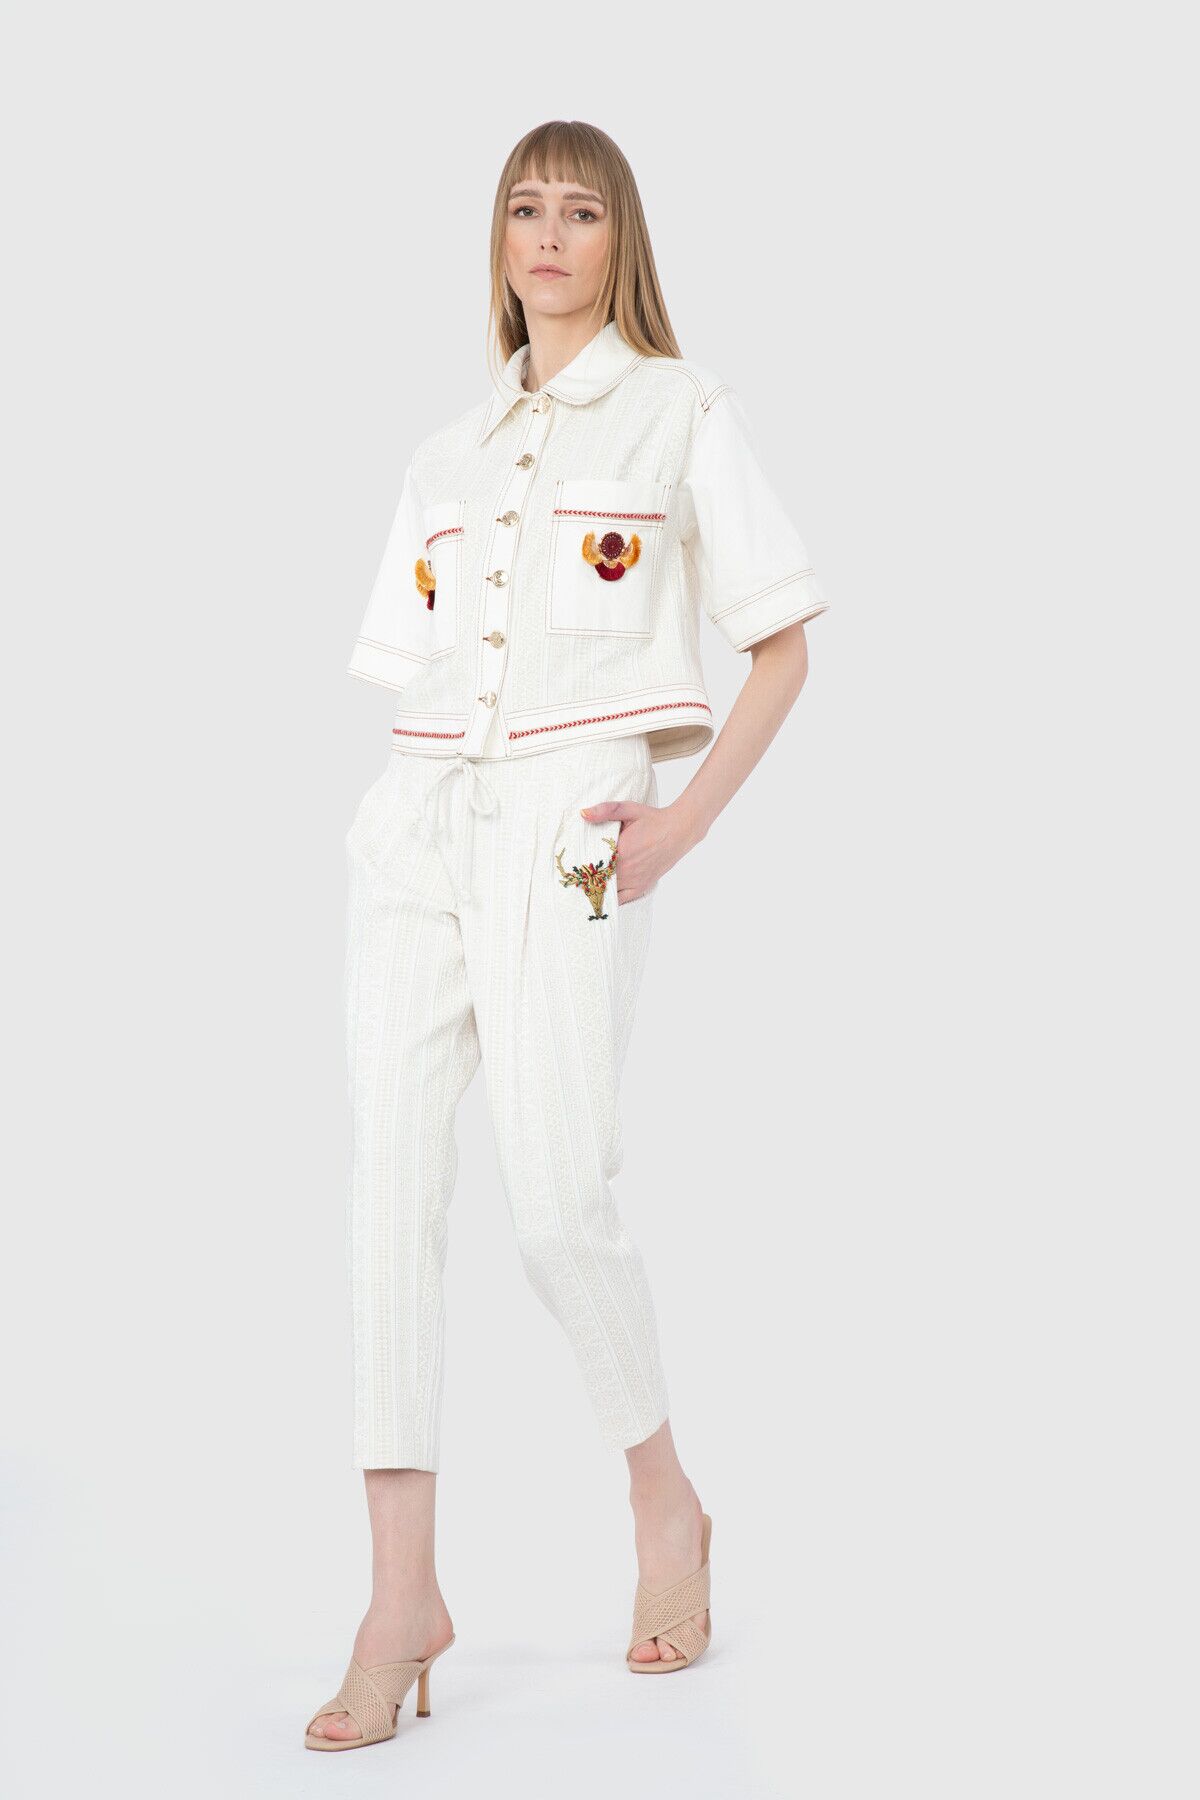  GIZIA - Contrast Fabric Ethnic Accessory Detail White Shirt